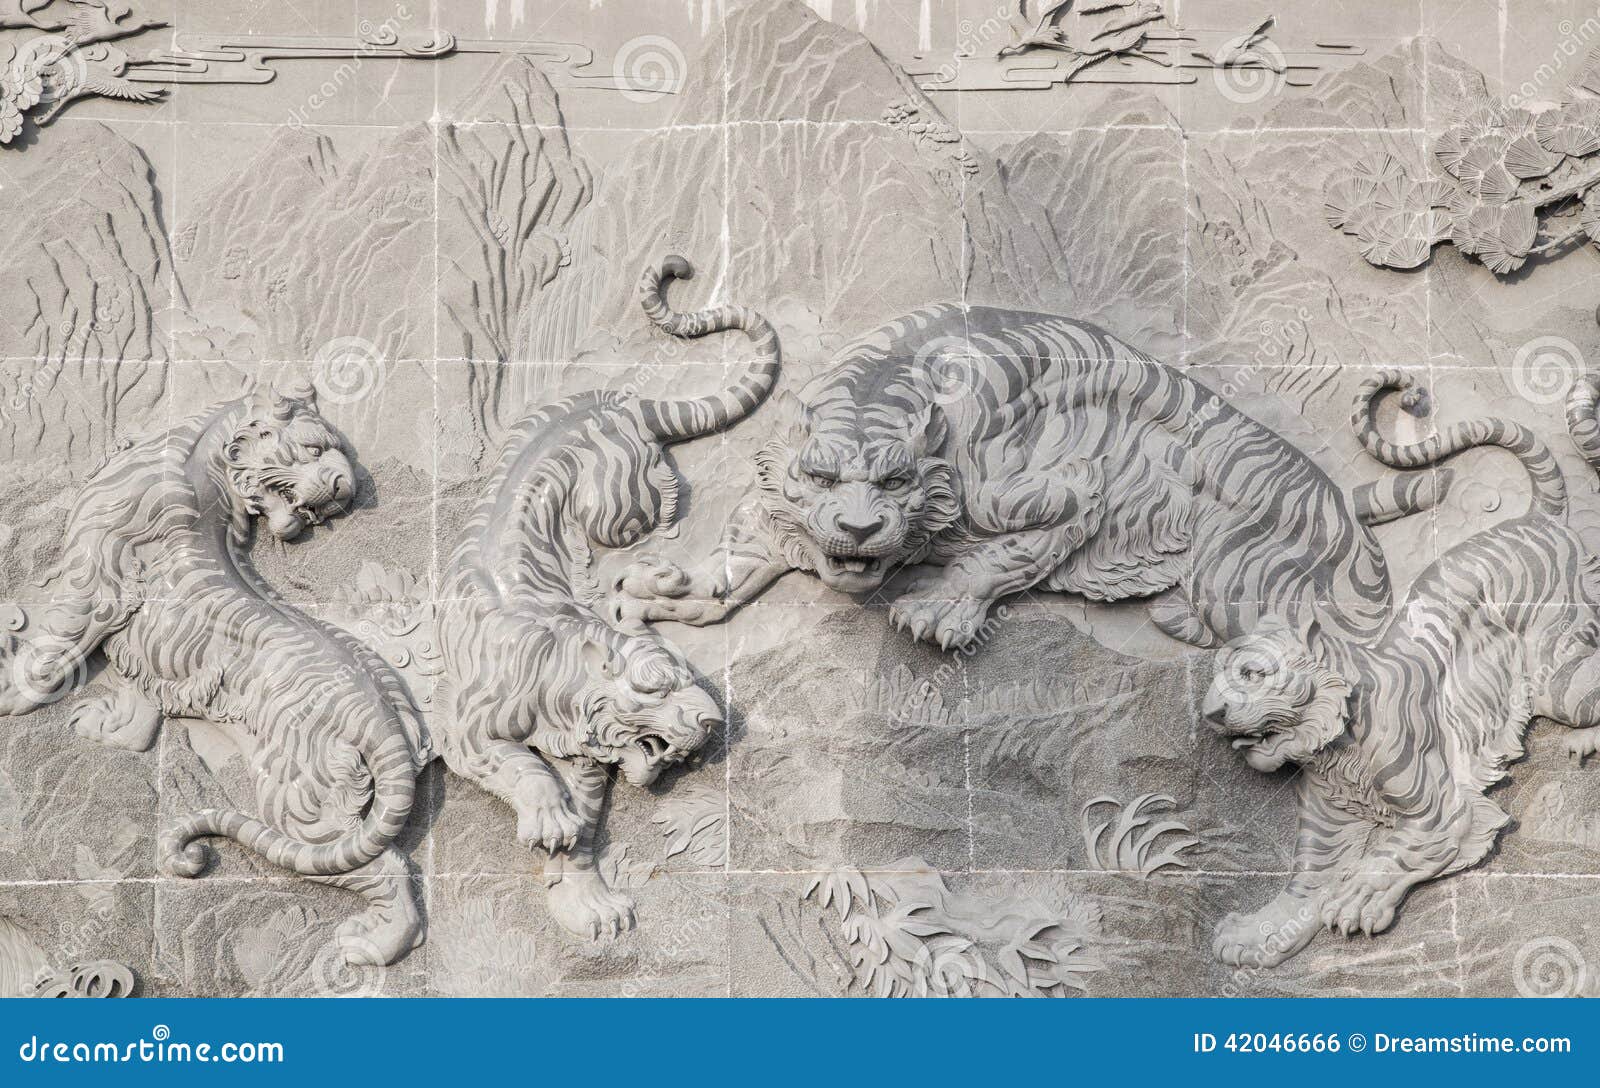 carved-stone-chinese-temple-tiger-statue-fighting-42046666.jpg